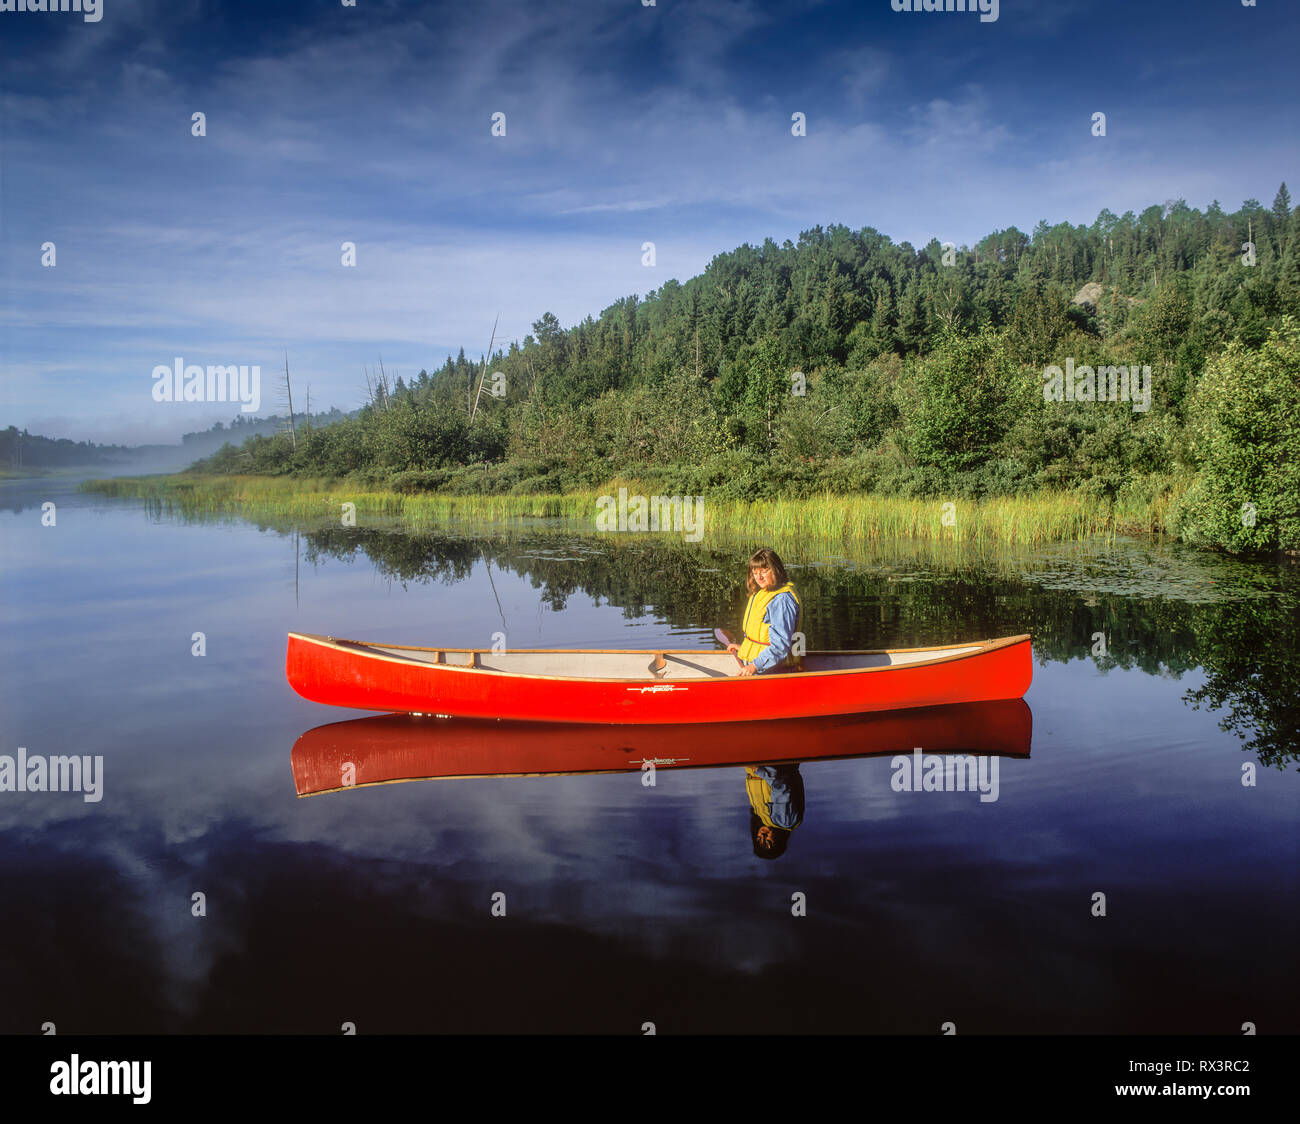 Woman in red canoe on the Montreal River access point to Lady Evelyn Smoothwater Provincial Park, Ontario, Canada Stock Photo